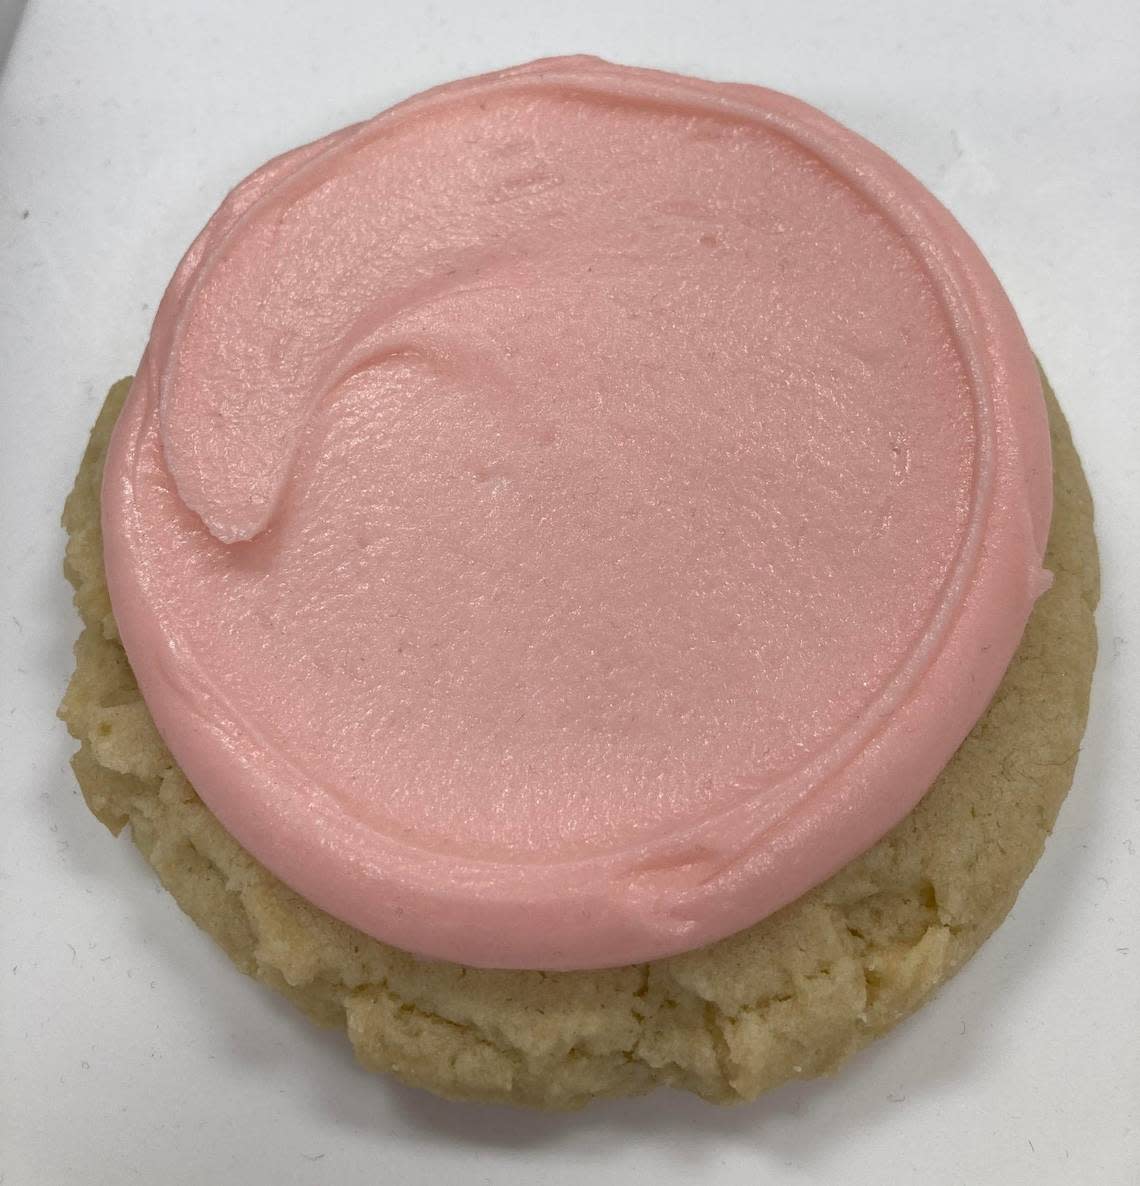 Classic pink sugar cookie at Crumbl Cookies in Warner Robins. The cookie is described as a vanilla sugar cookie topped with a pink swoop of almond frosting.